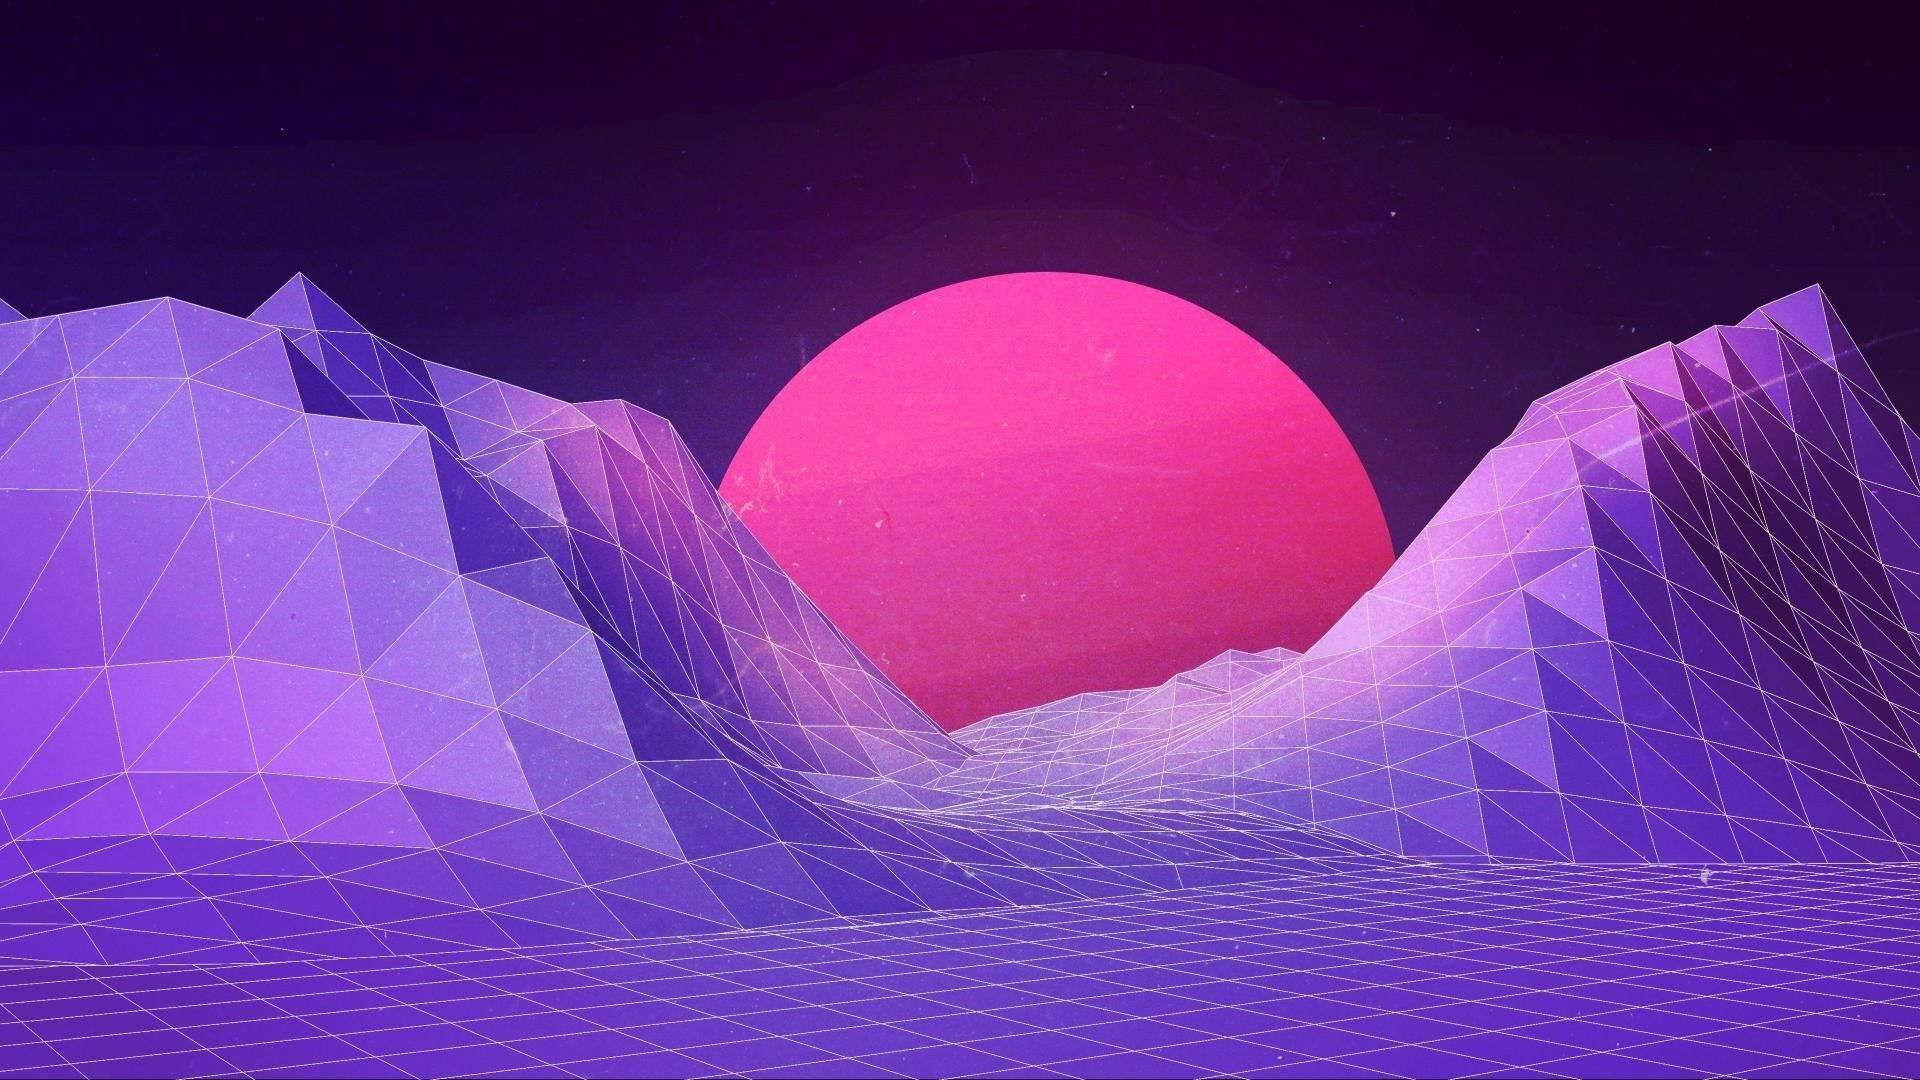 Synthwave Moon On Mountains Wallpaper